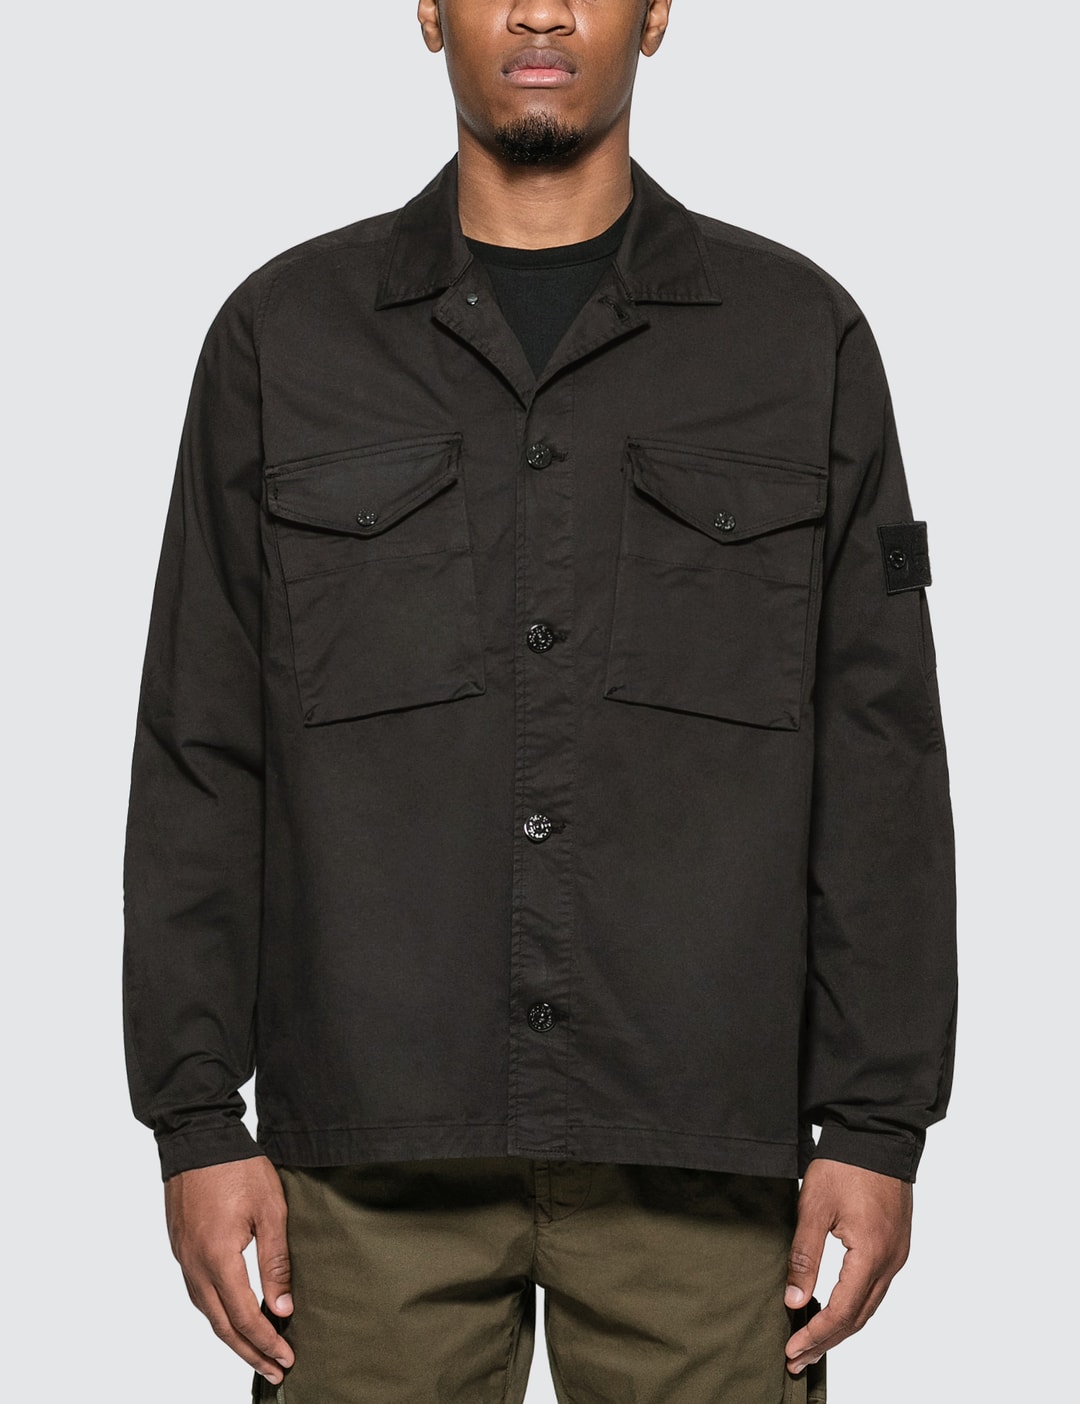 Stone Island - Ghost Pieces Overshirt | HBX - Globally Curated Fashion ...